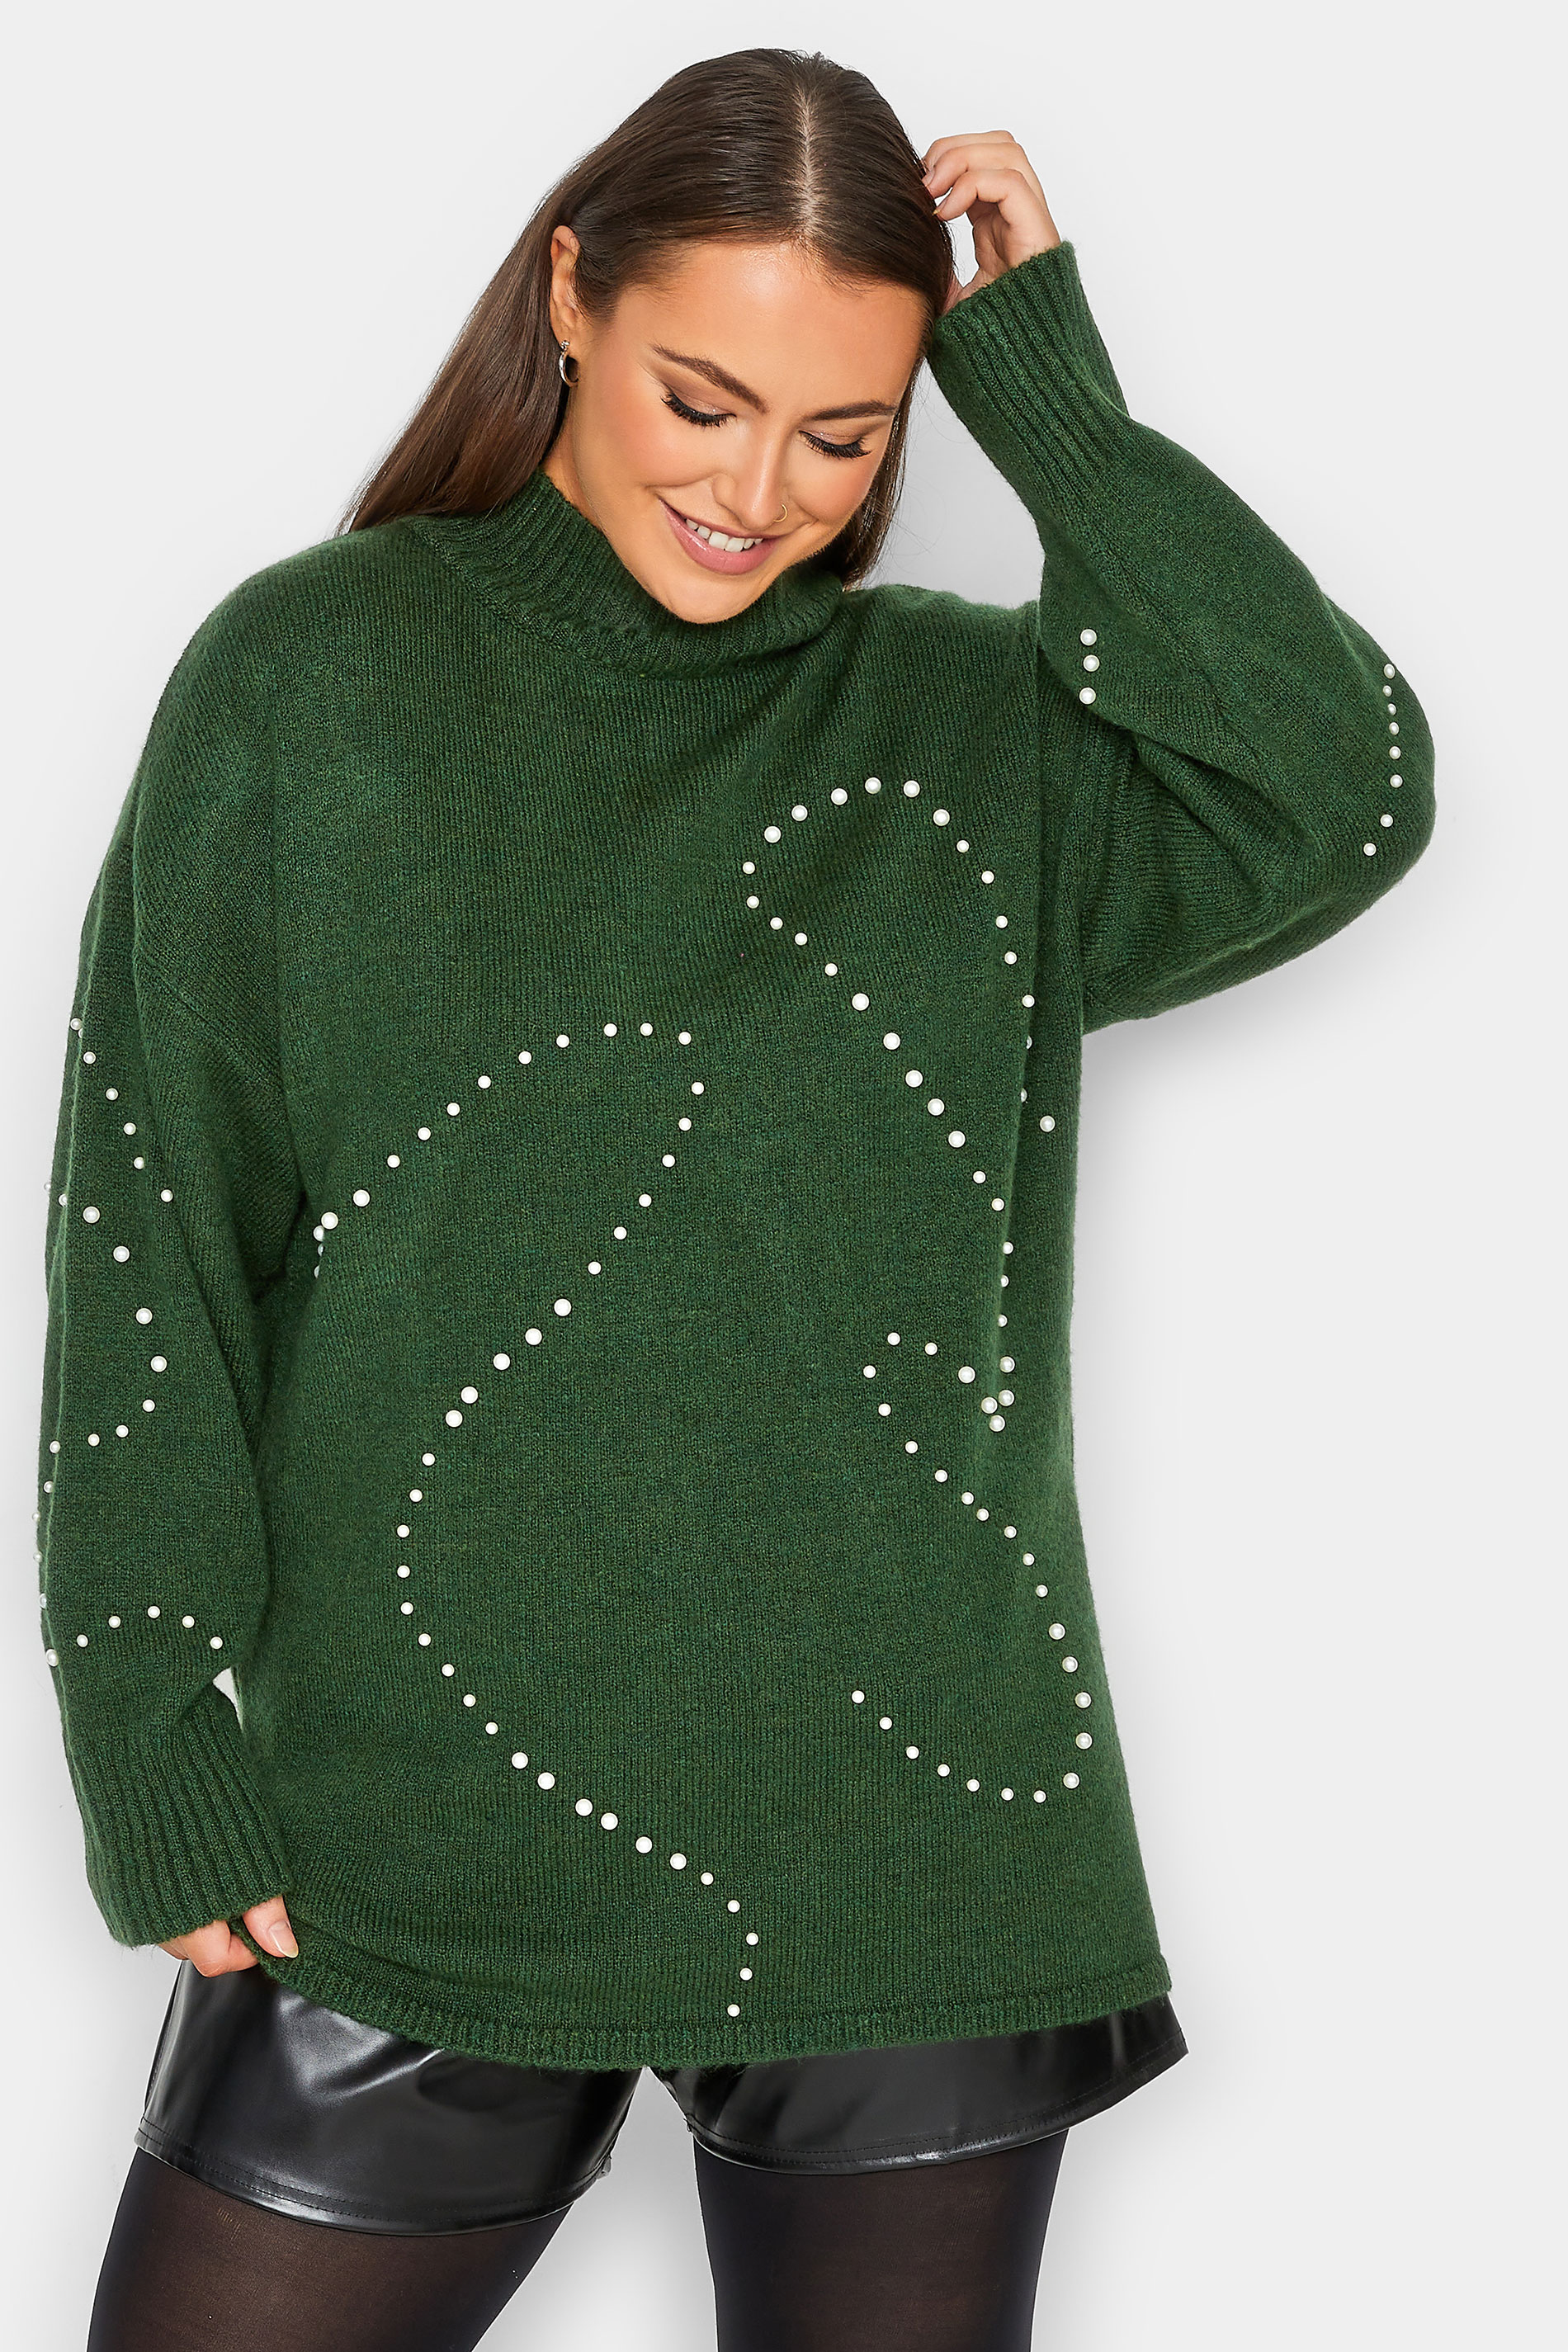 YOURS LUXURY Plus Size Green Pearl Embellished Batwing Jumper | Yours Clothing 1